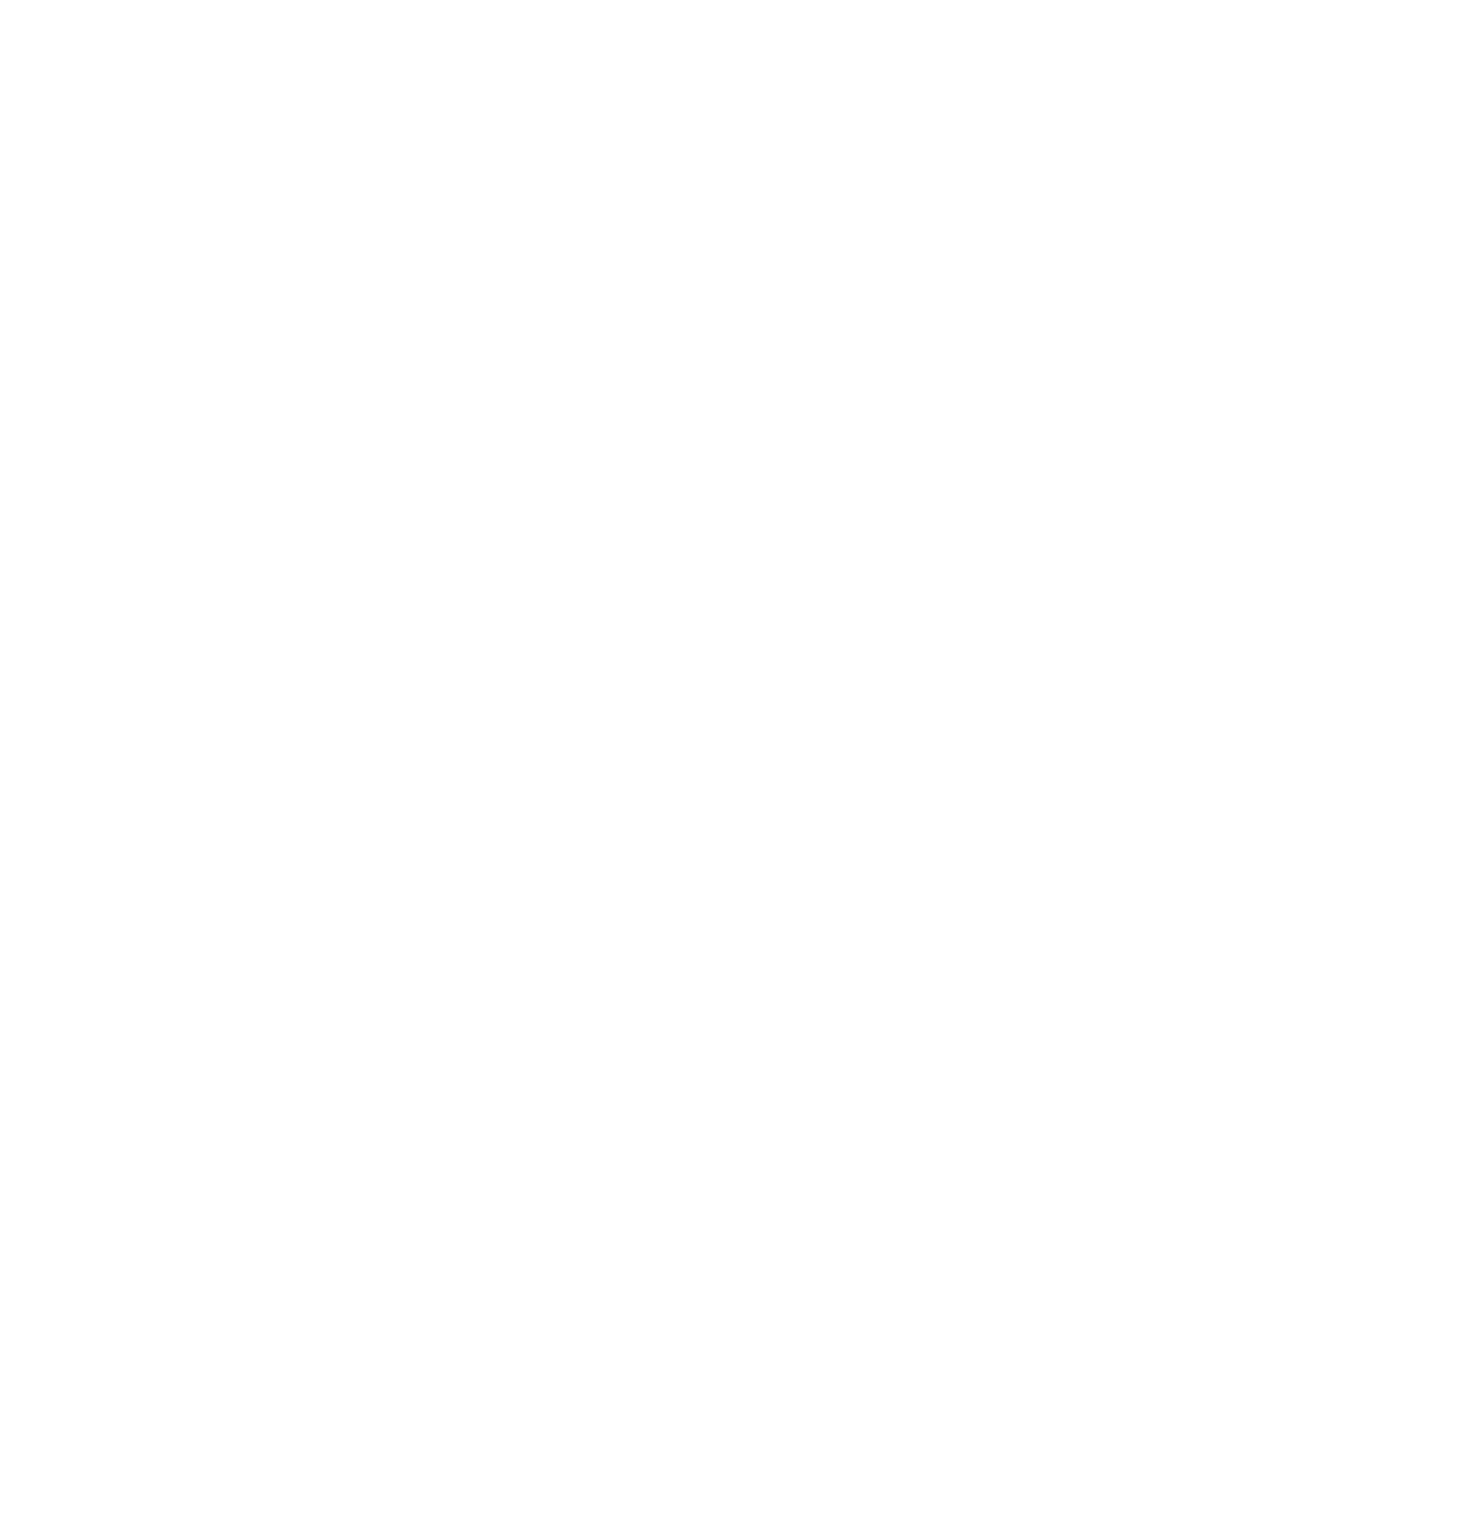 Doximity logo for dark backgrounds (transparent PNG)